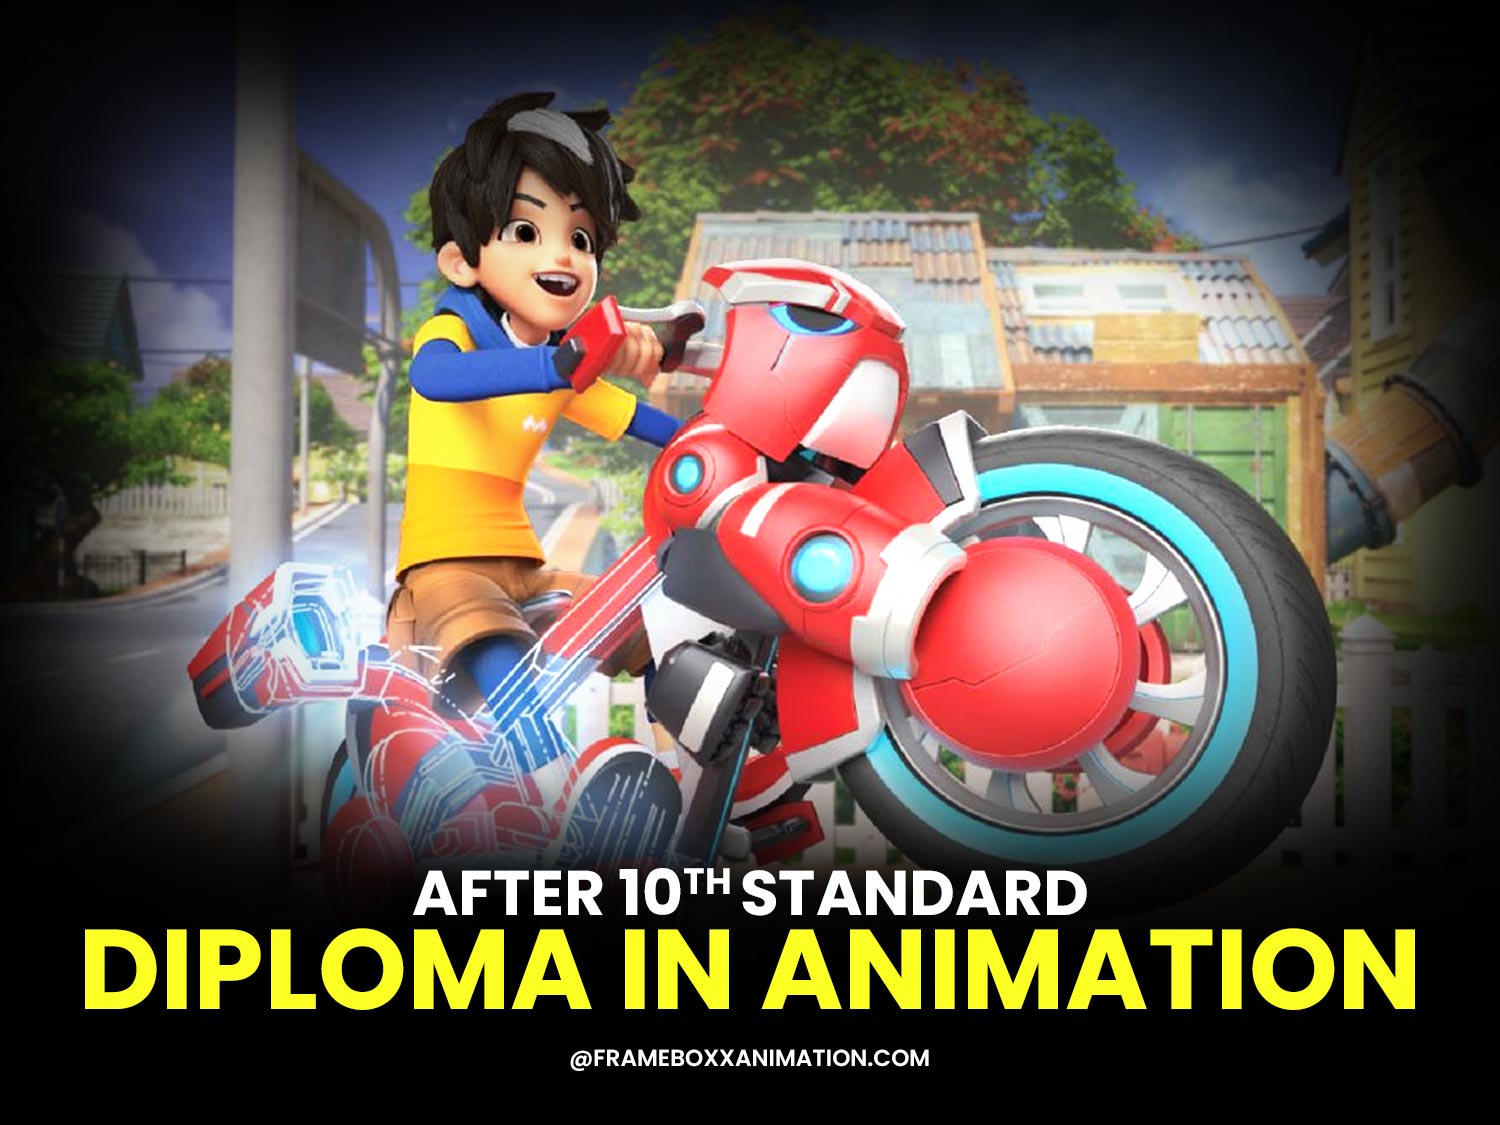 Diploma-in-animation-after-10th